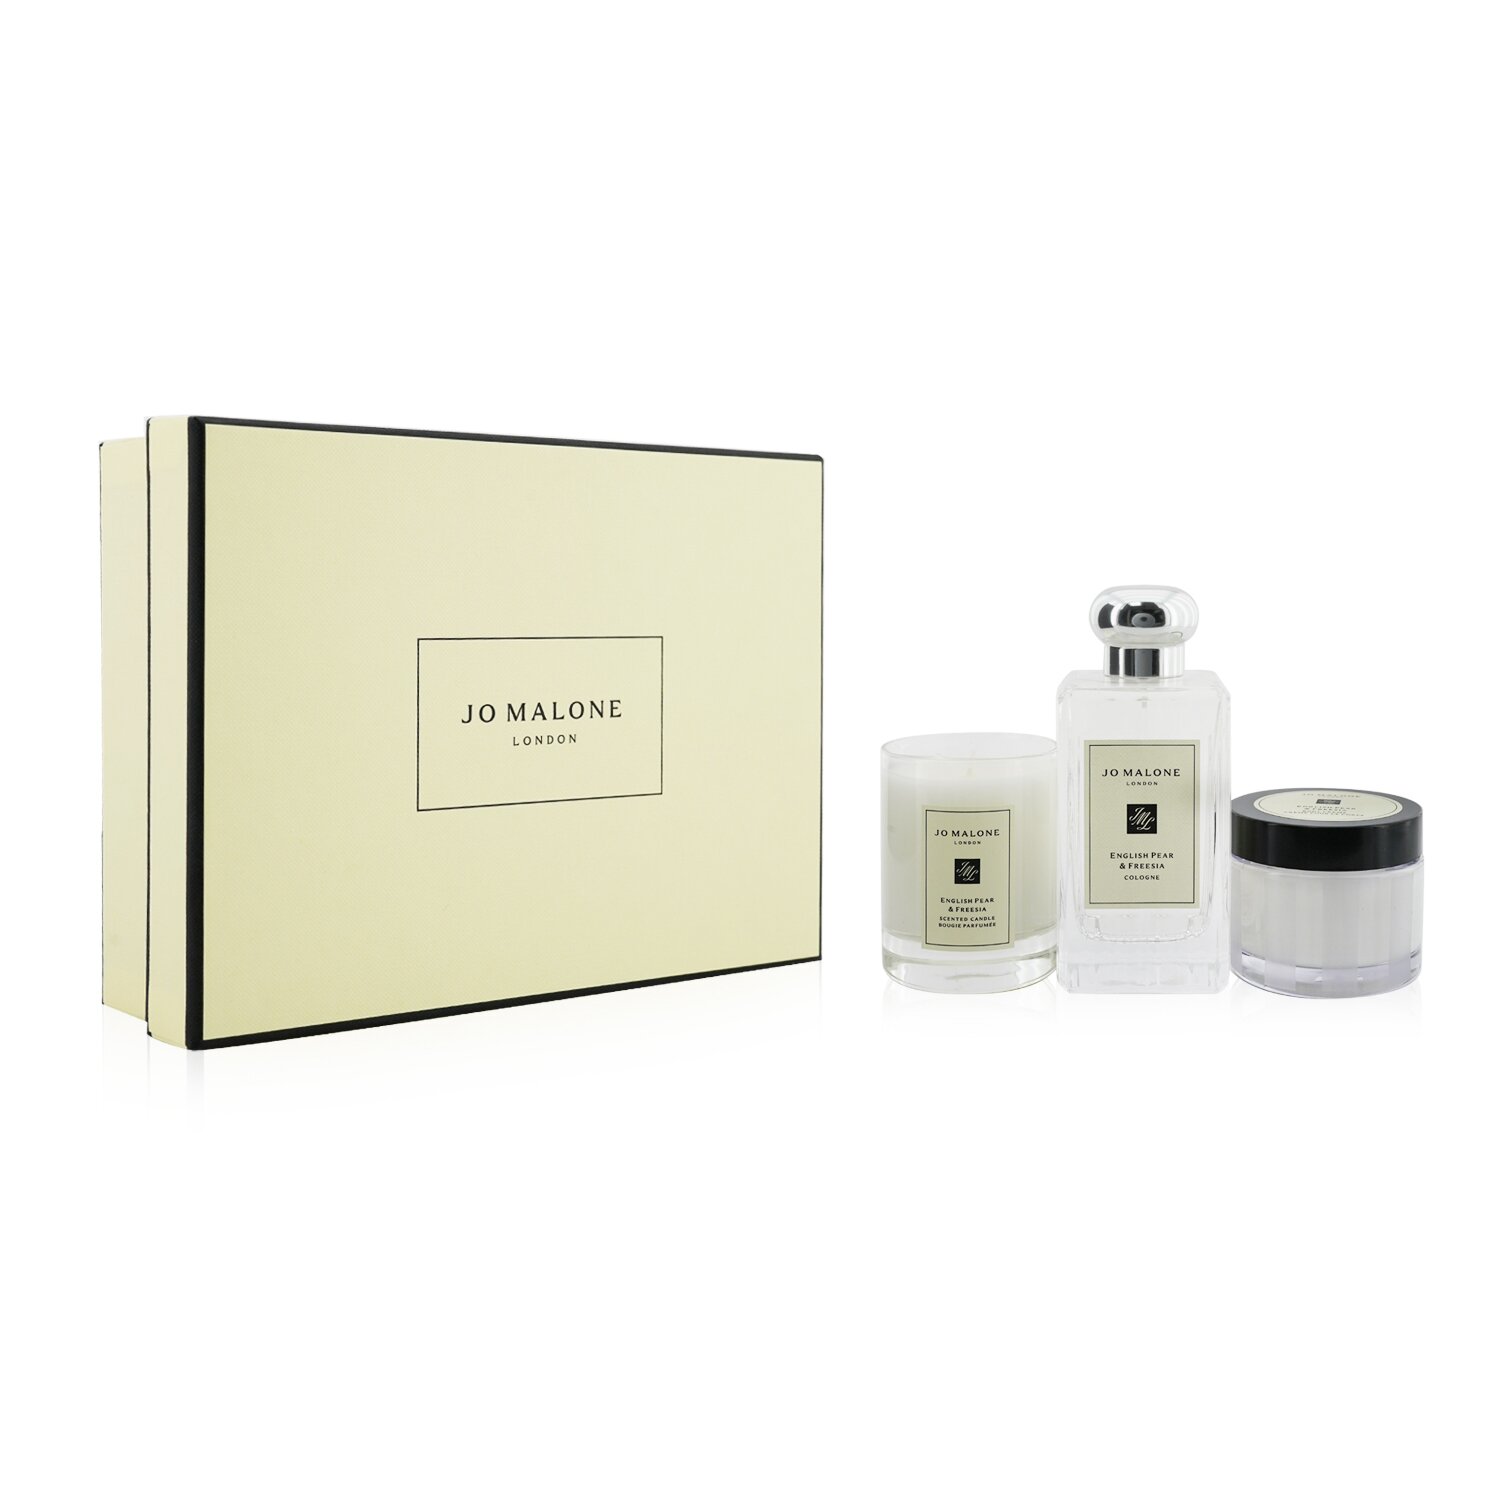 Ekspert snesevis Smidighed Jo Malone English Pear & Freesia Coffret: Cologne Spray 100ml/3.4oz + Body  Cream 50ml/1.7oz + Scented Candle 4.78cm/1.88inches (Height) 3pcs | KOODING